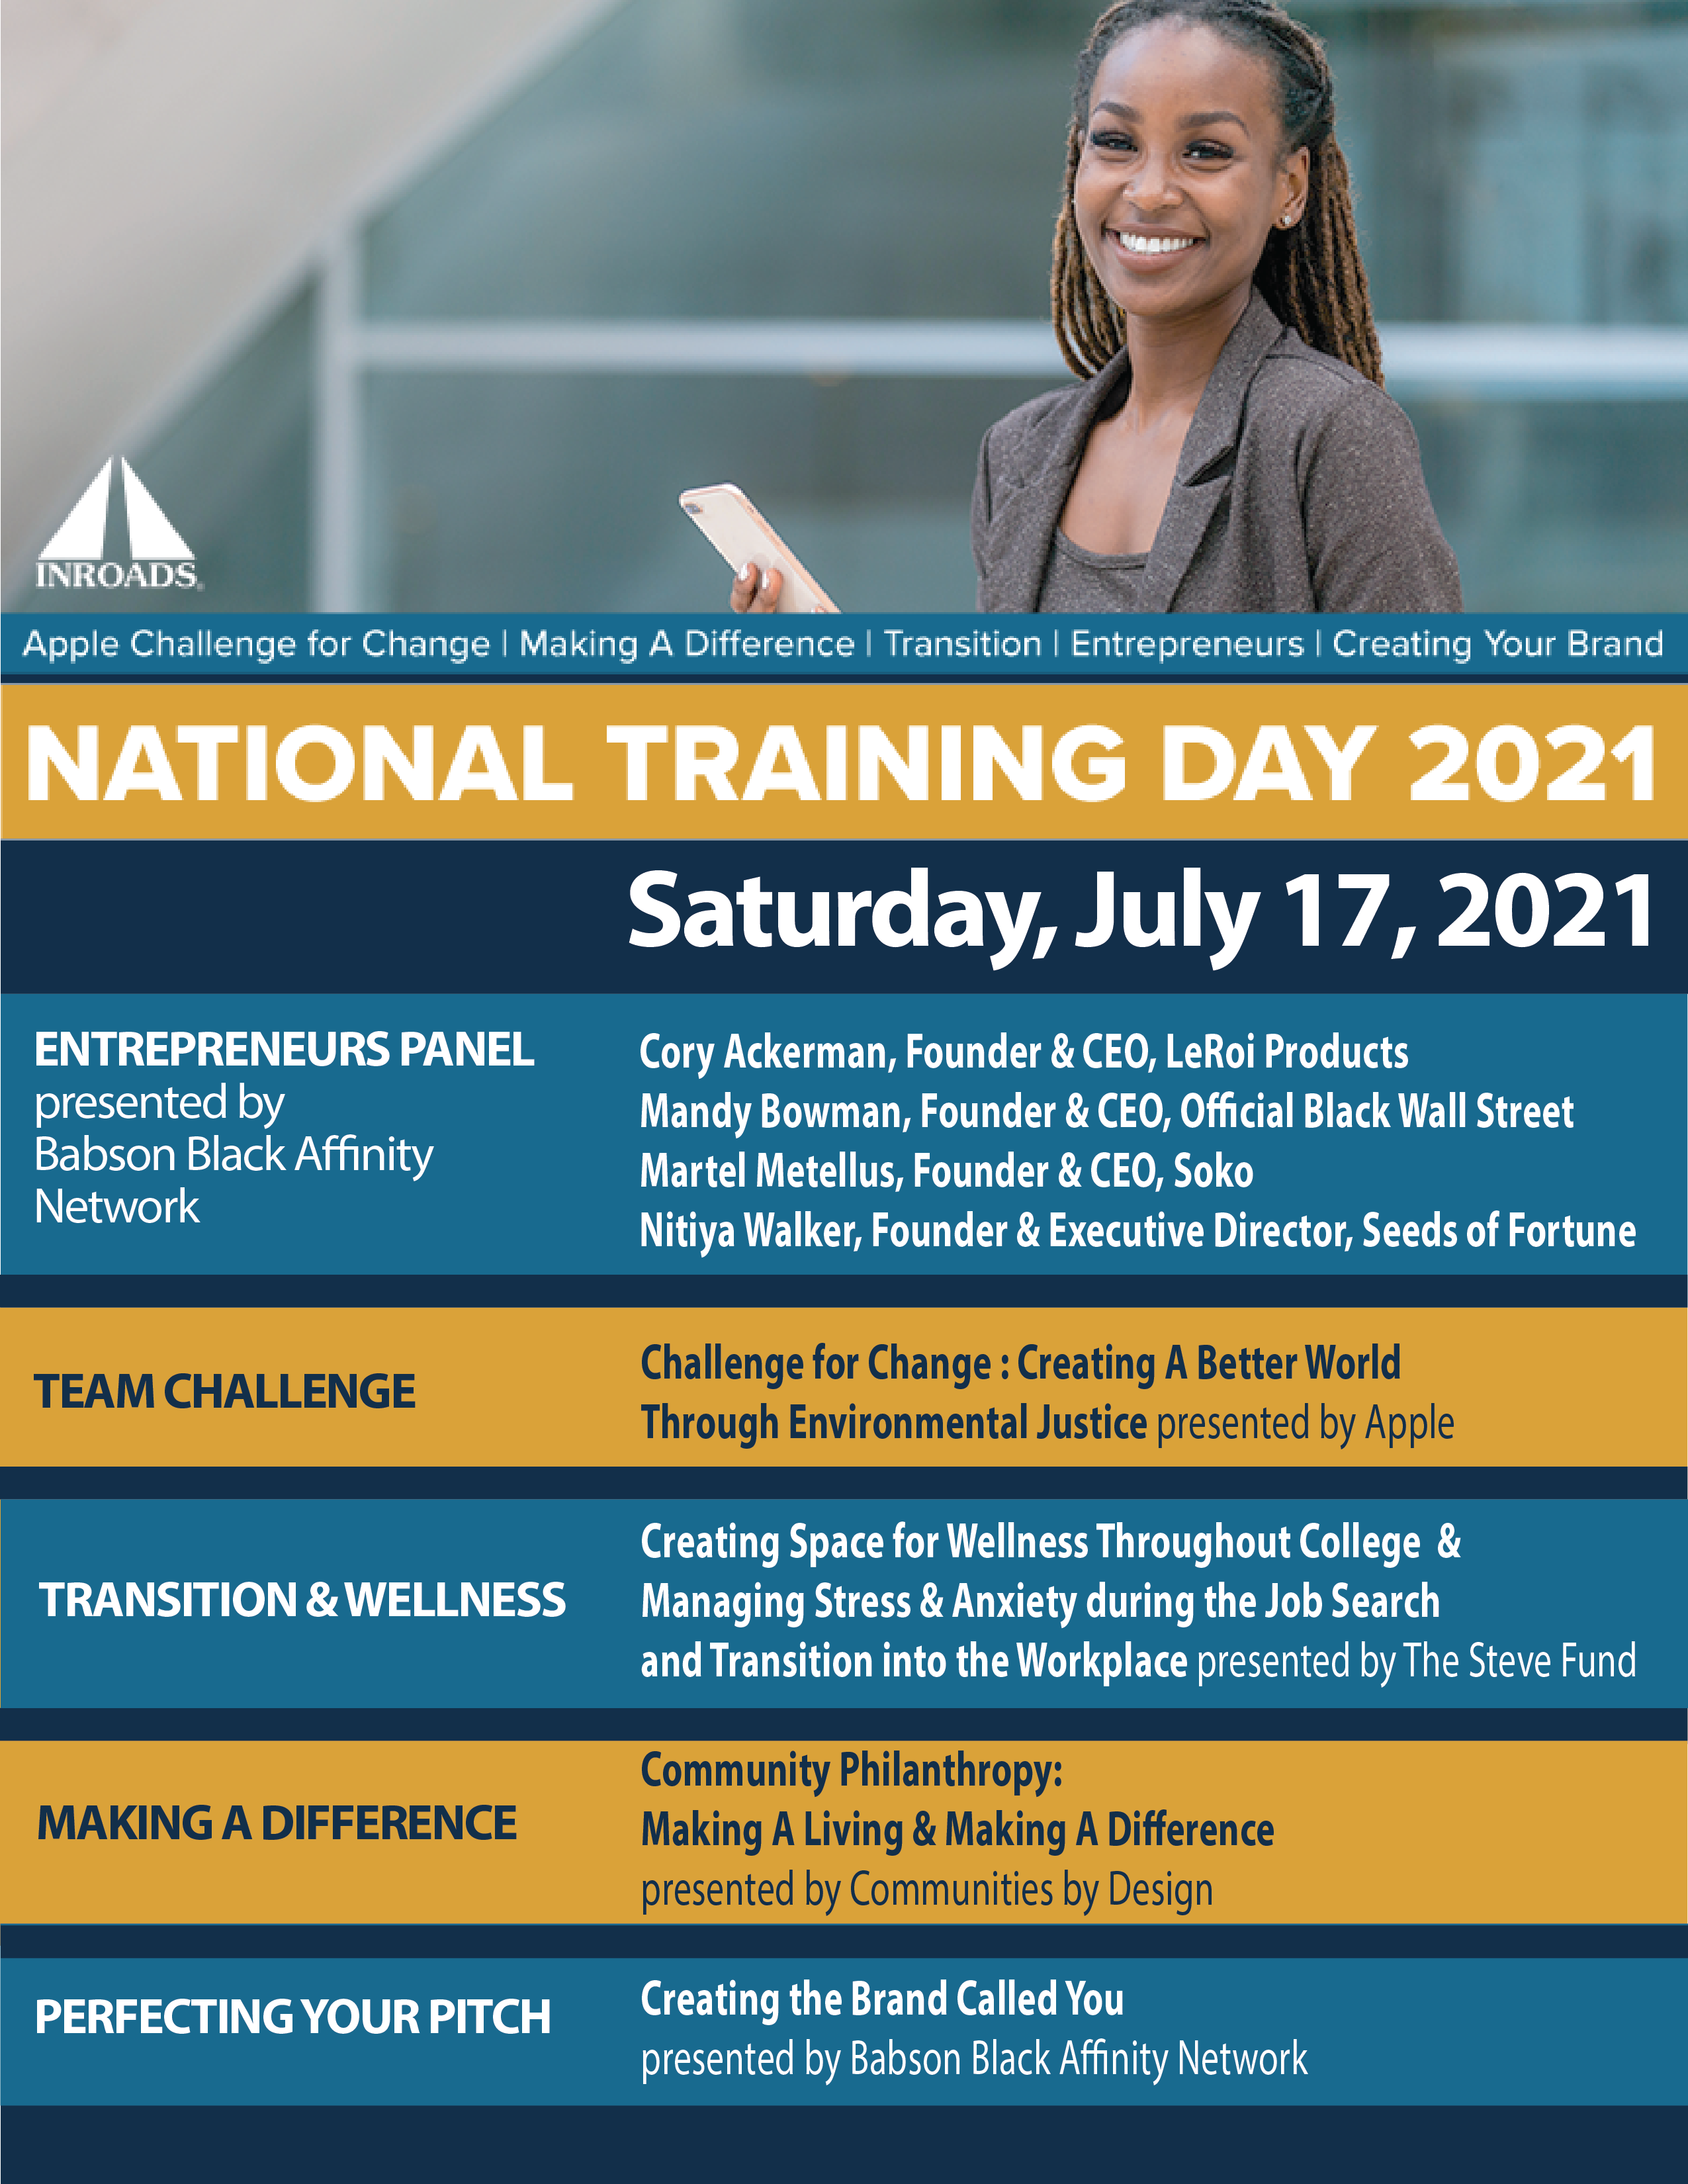 National Training Day 2021 INROADS